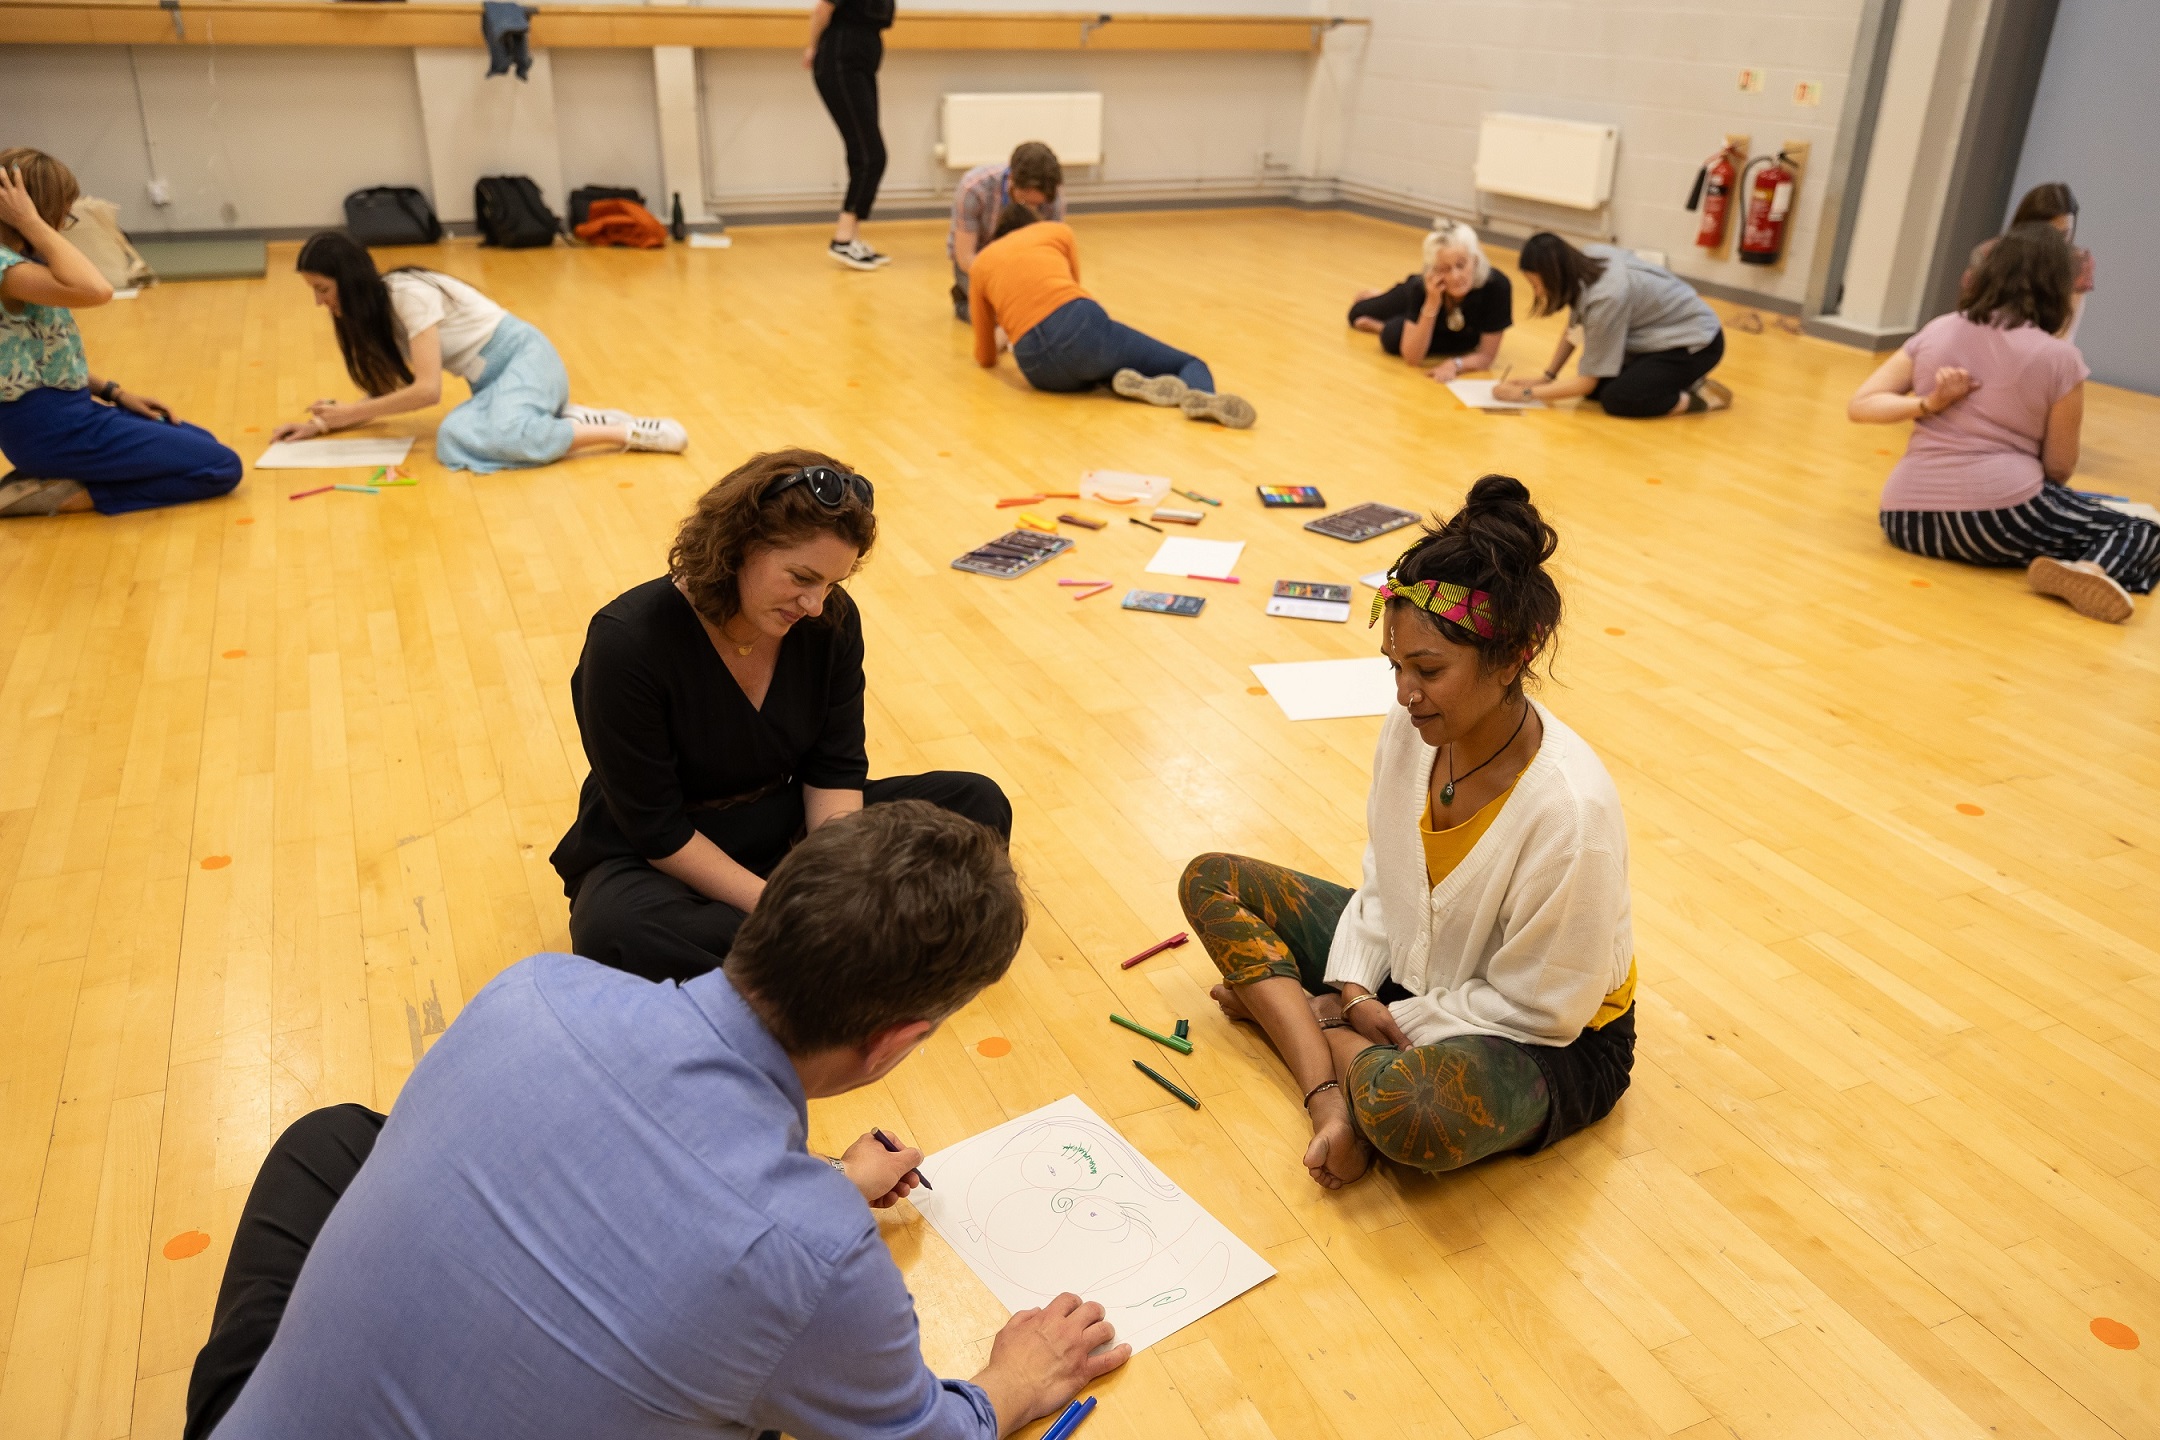 Groups of women are sat on the floor in a hall writing on paper, taking part in a workshop